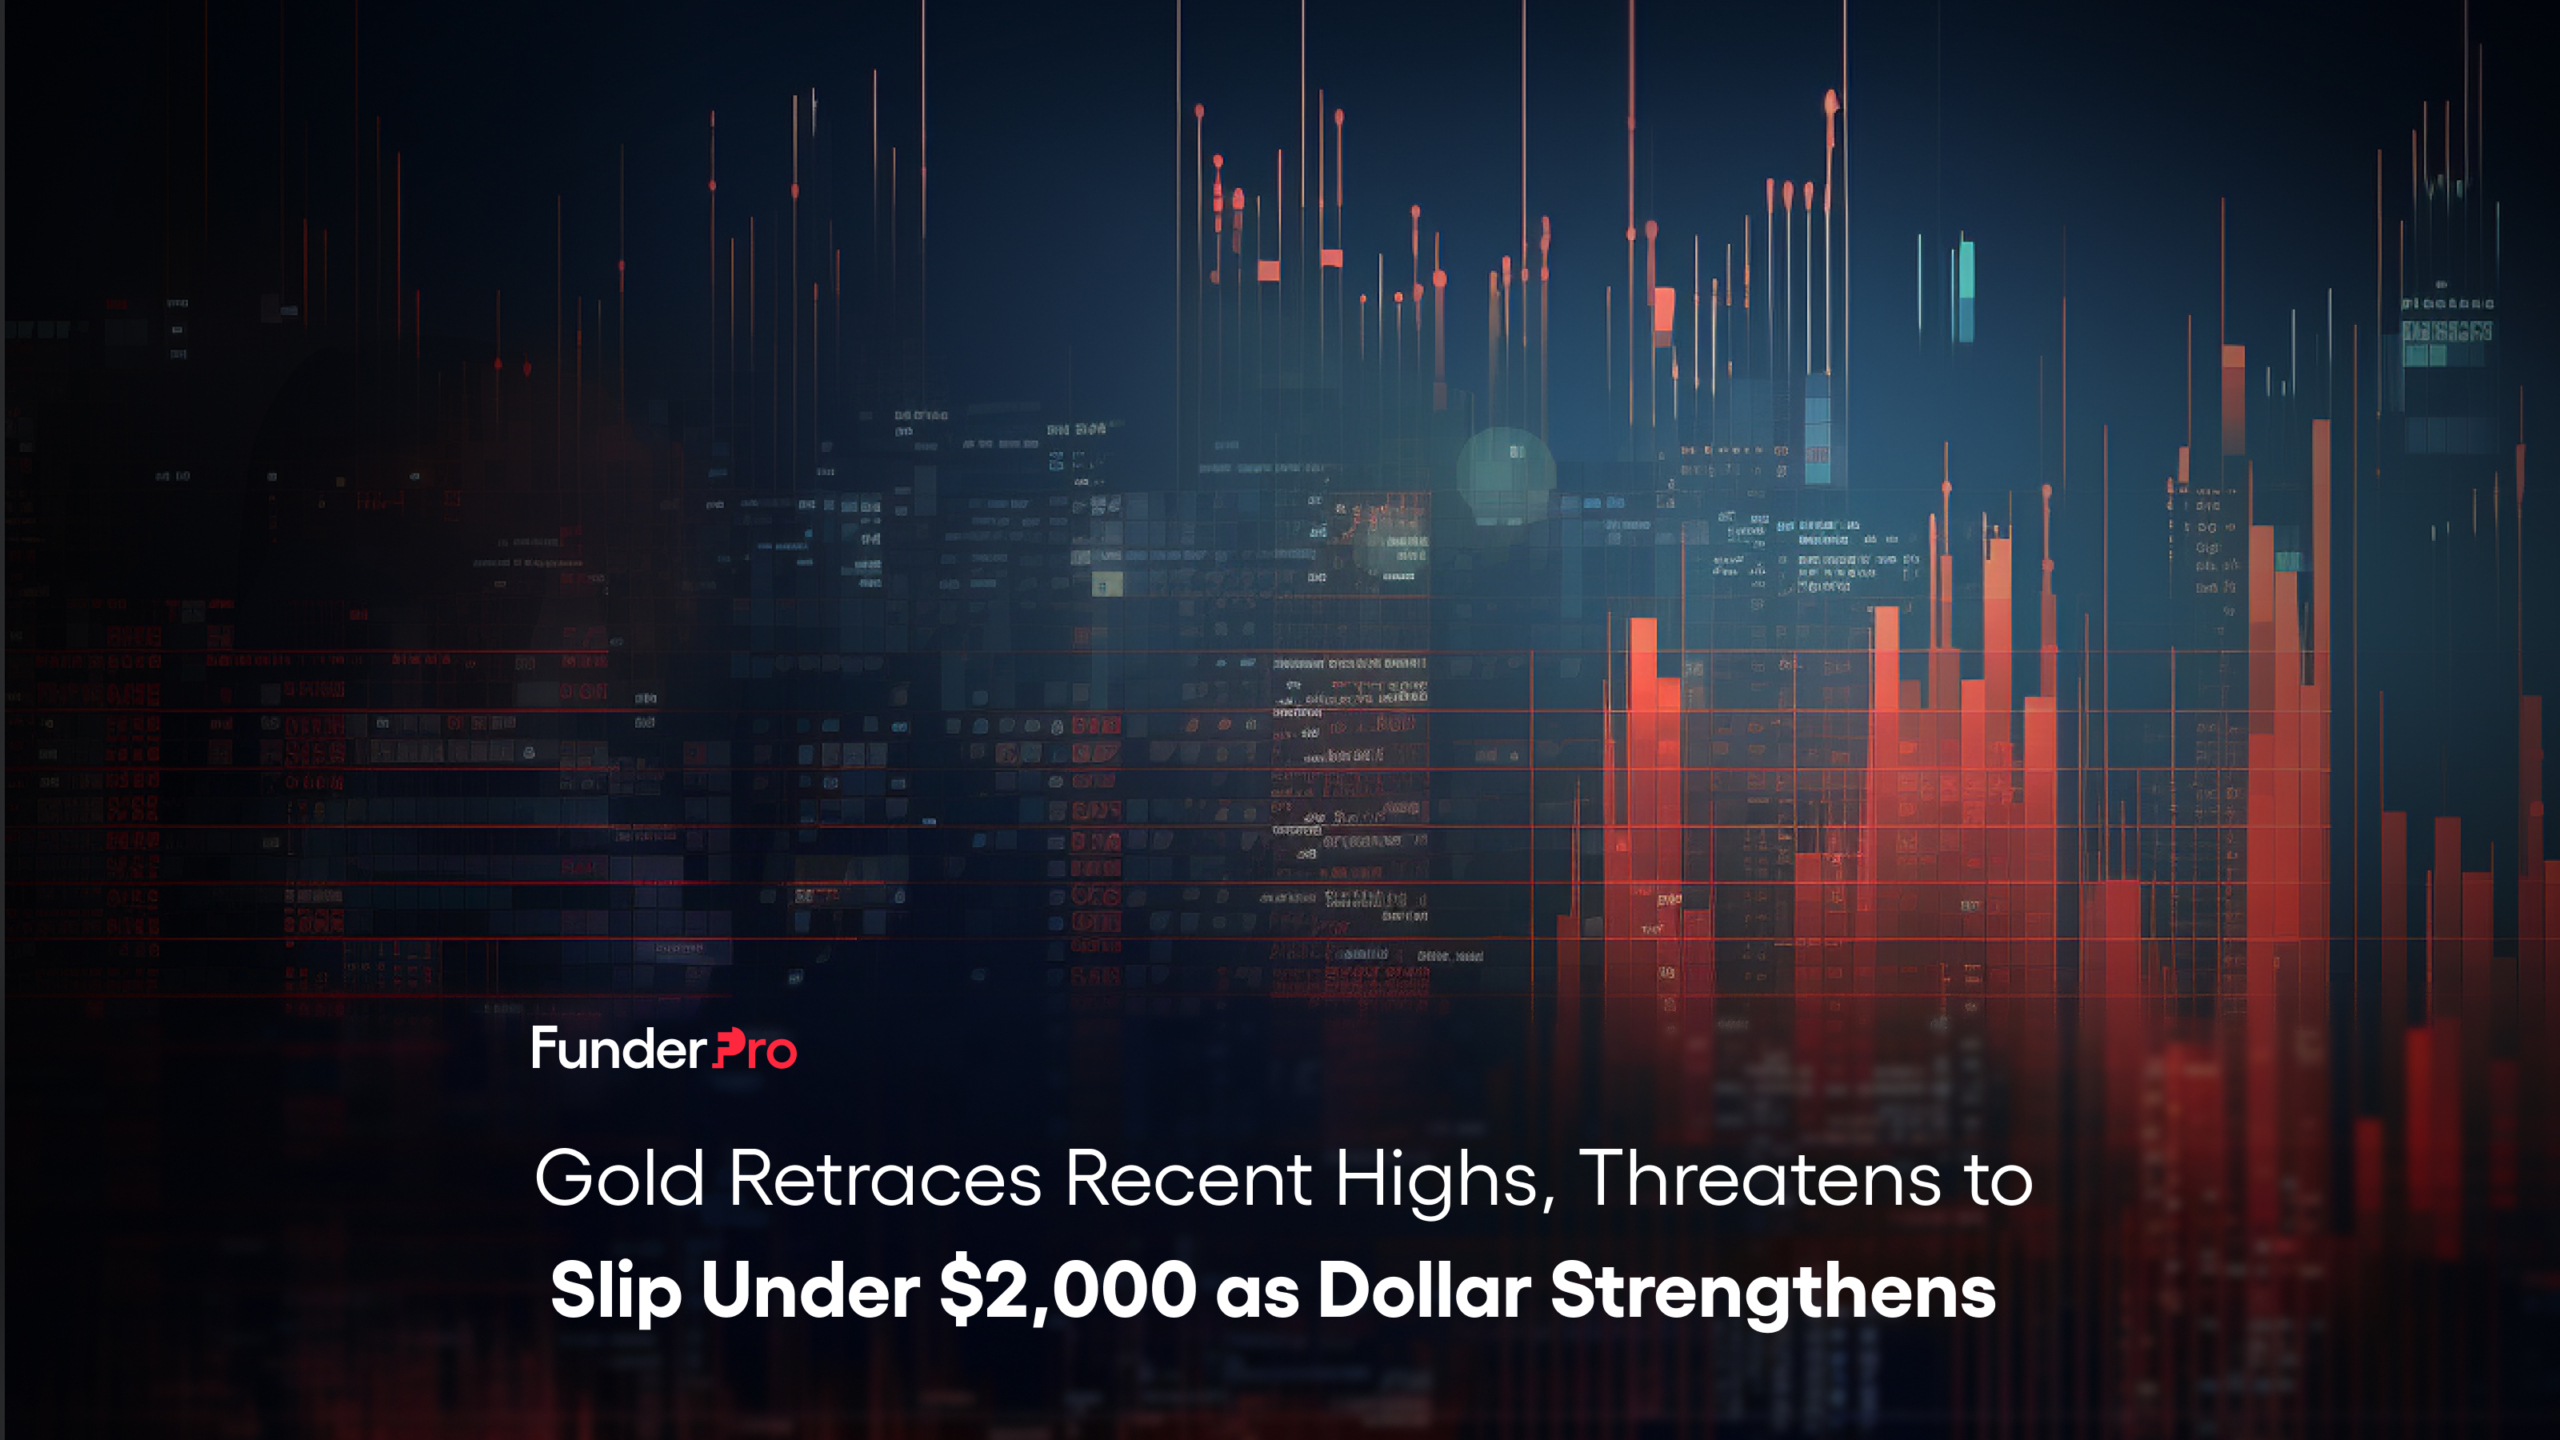 Gold Retraces Recent Highs, Threatens to Slip Under $2,000 as Dollar Strengthens